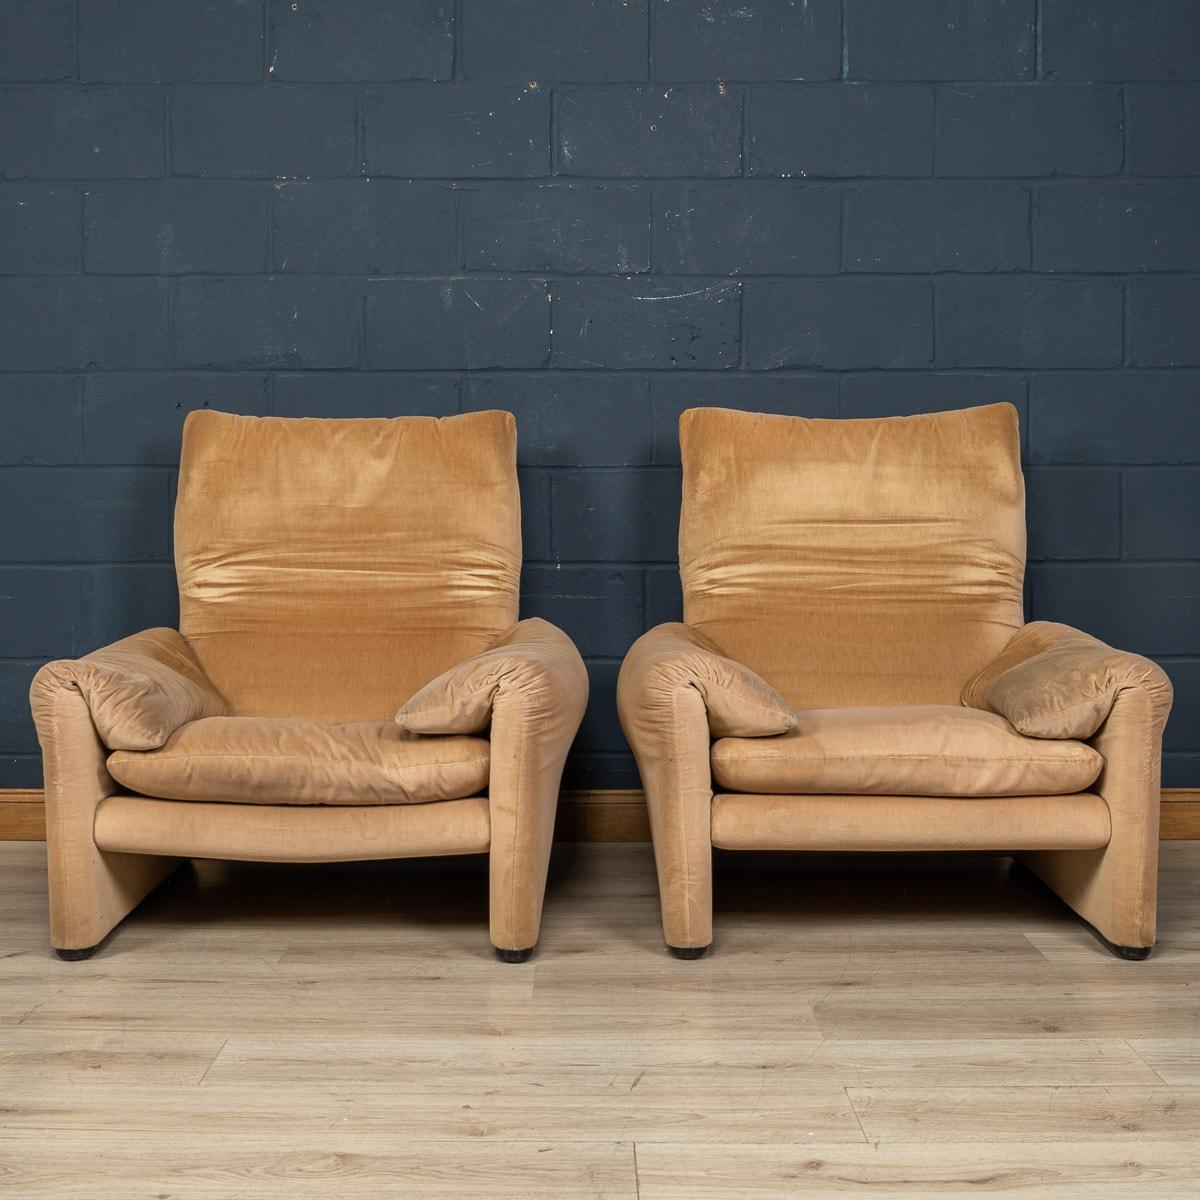 A Pair Of Italian Maralunga Armchairs By Vico Magistretti For Cassina, c.1980 In Good Condition In Royal Tunbridge Wells, Kent